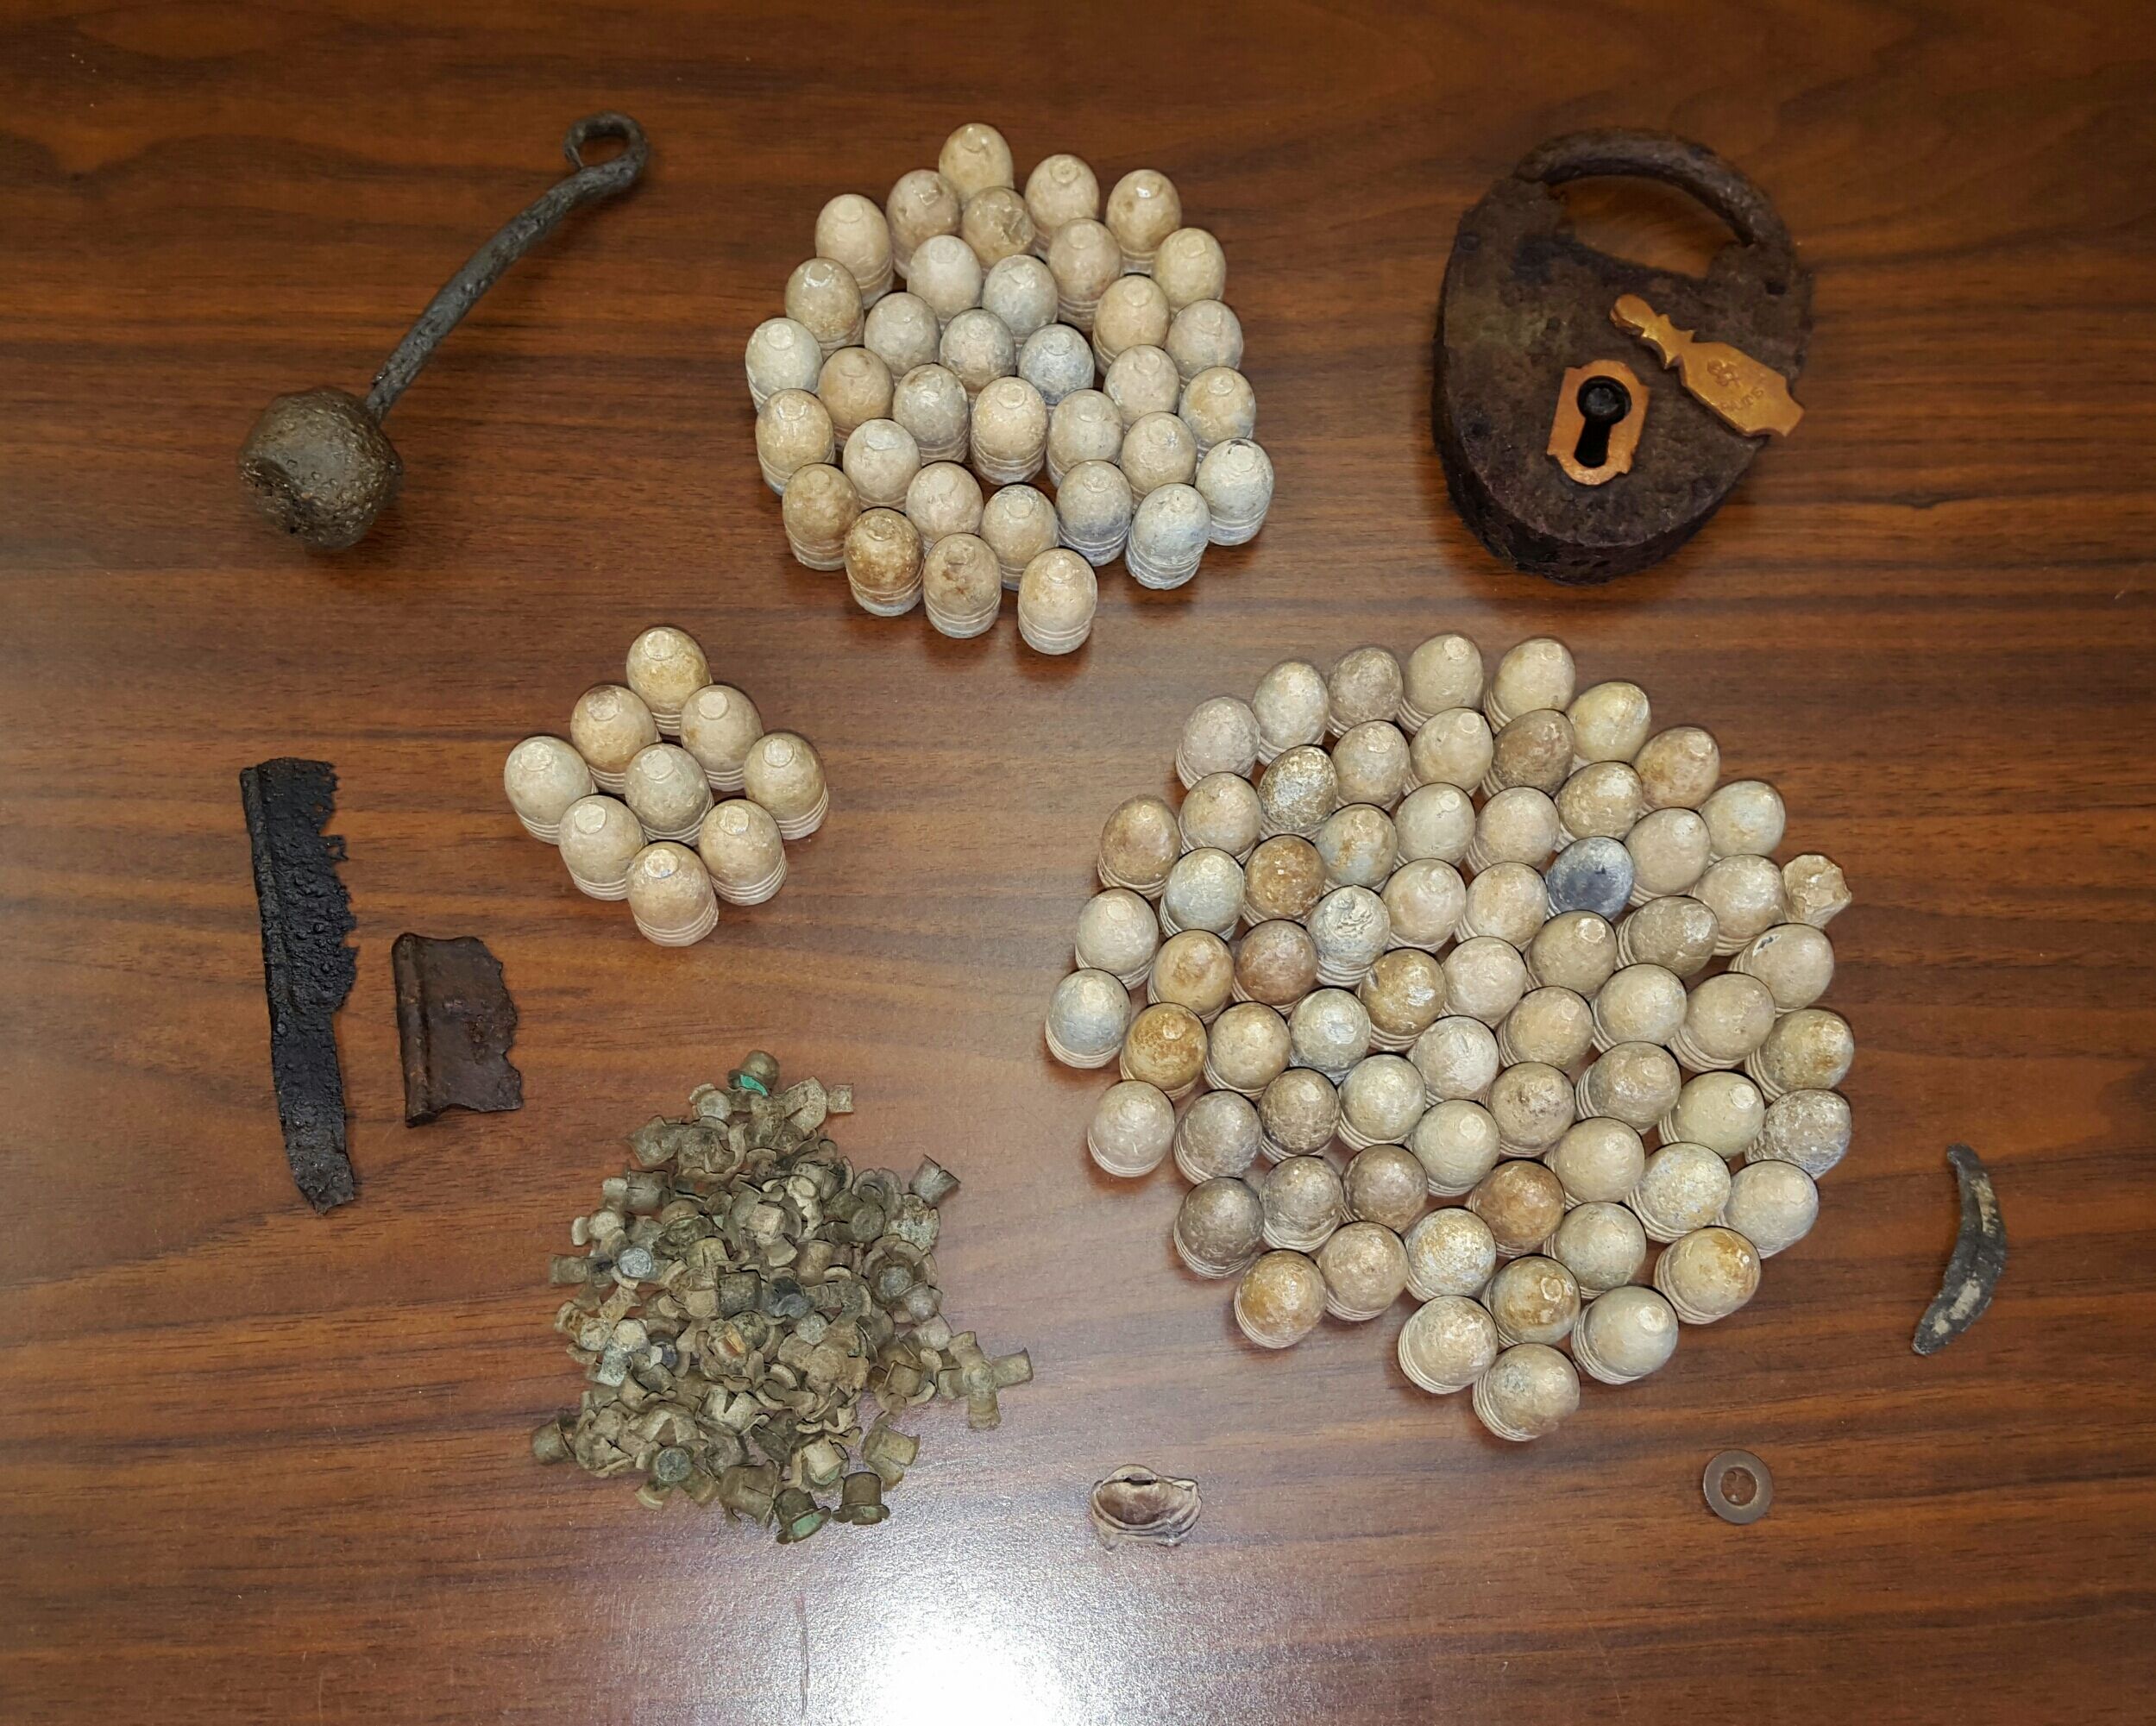 Dropped Union bullets found at one site. Also Civil War percussion caps and pre-CW relics.